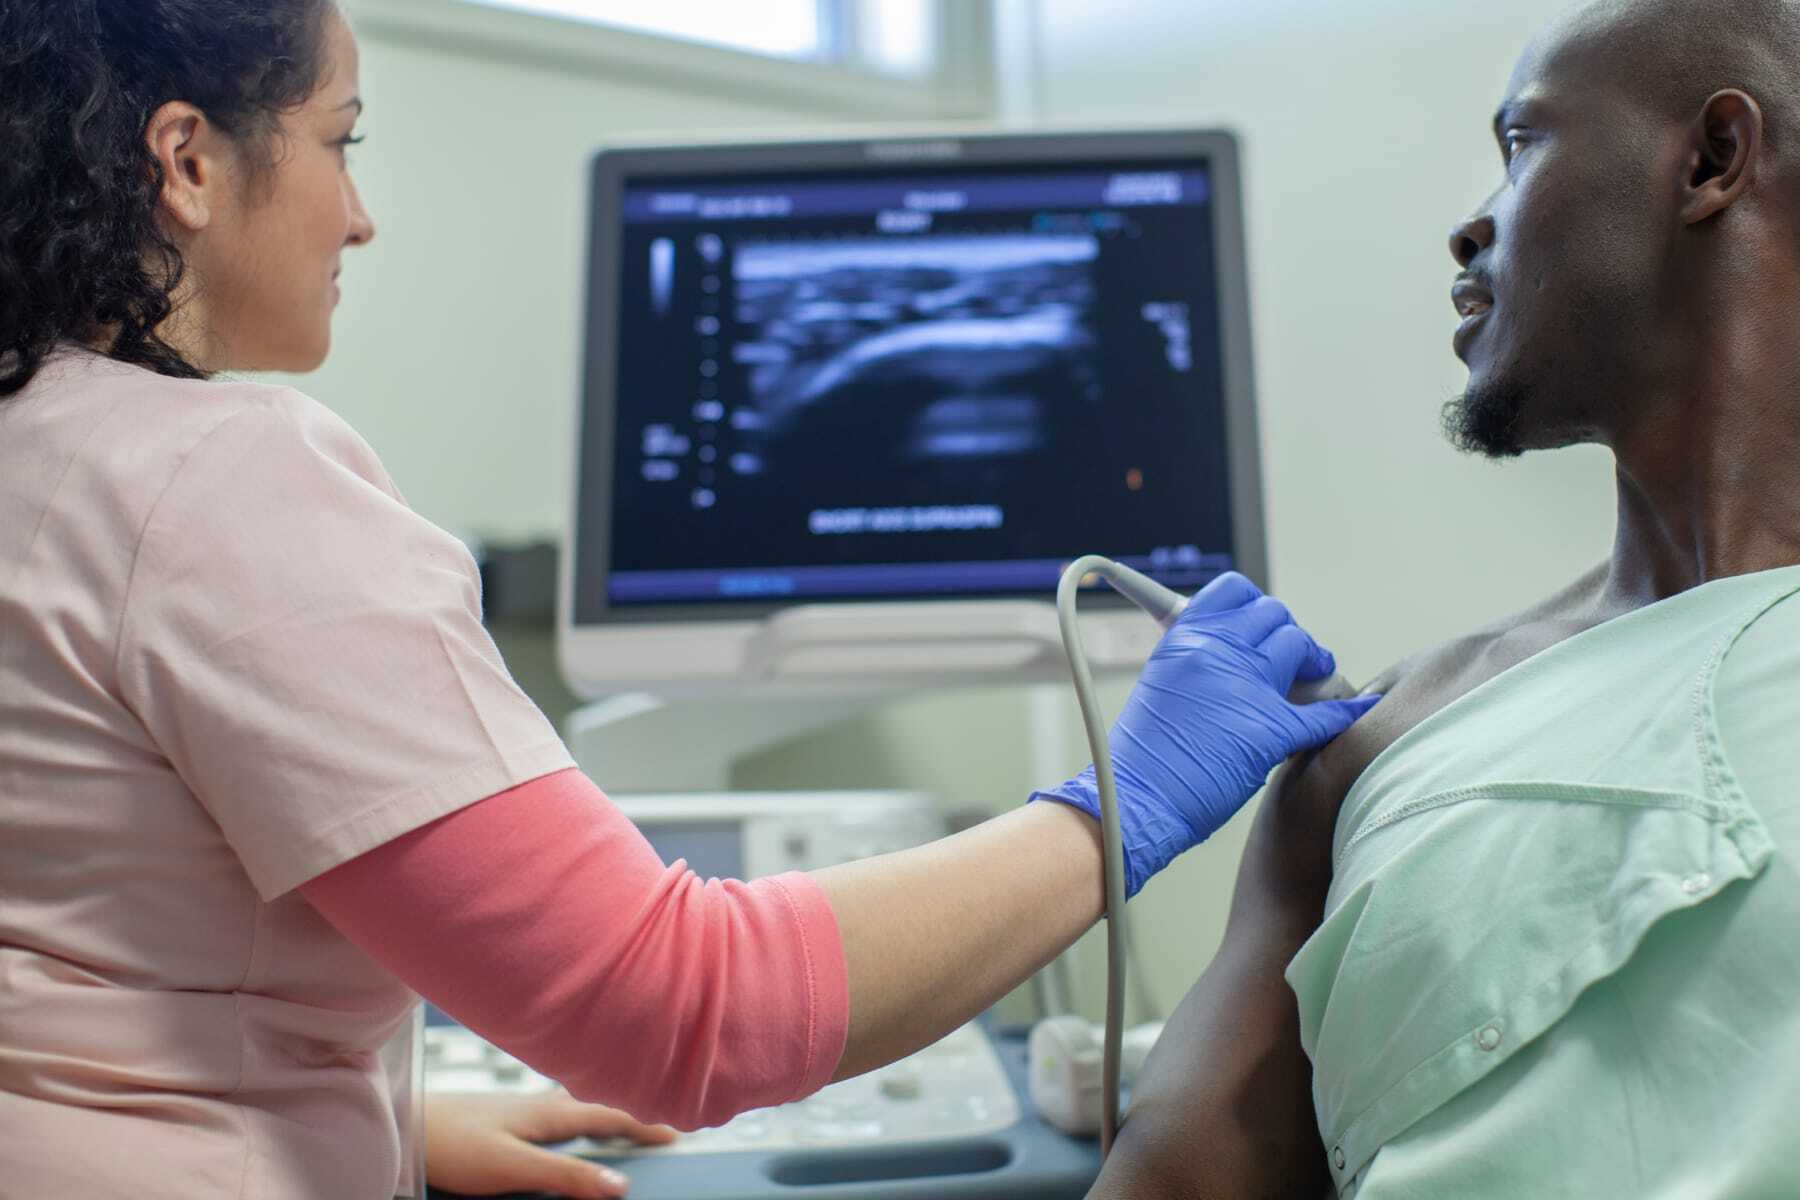 Woman taking a sonogram of a man's chest